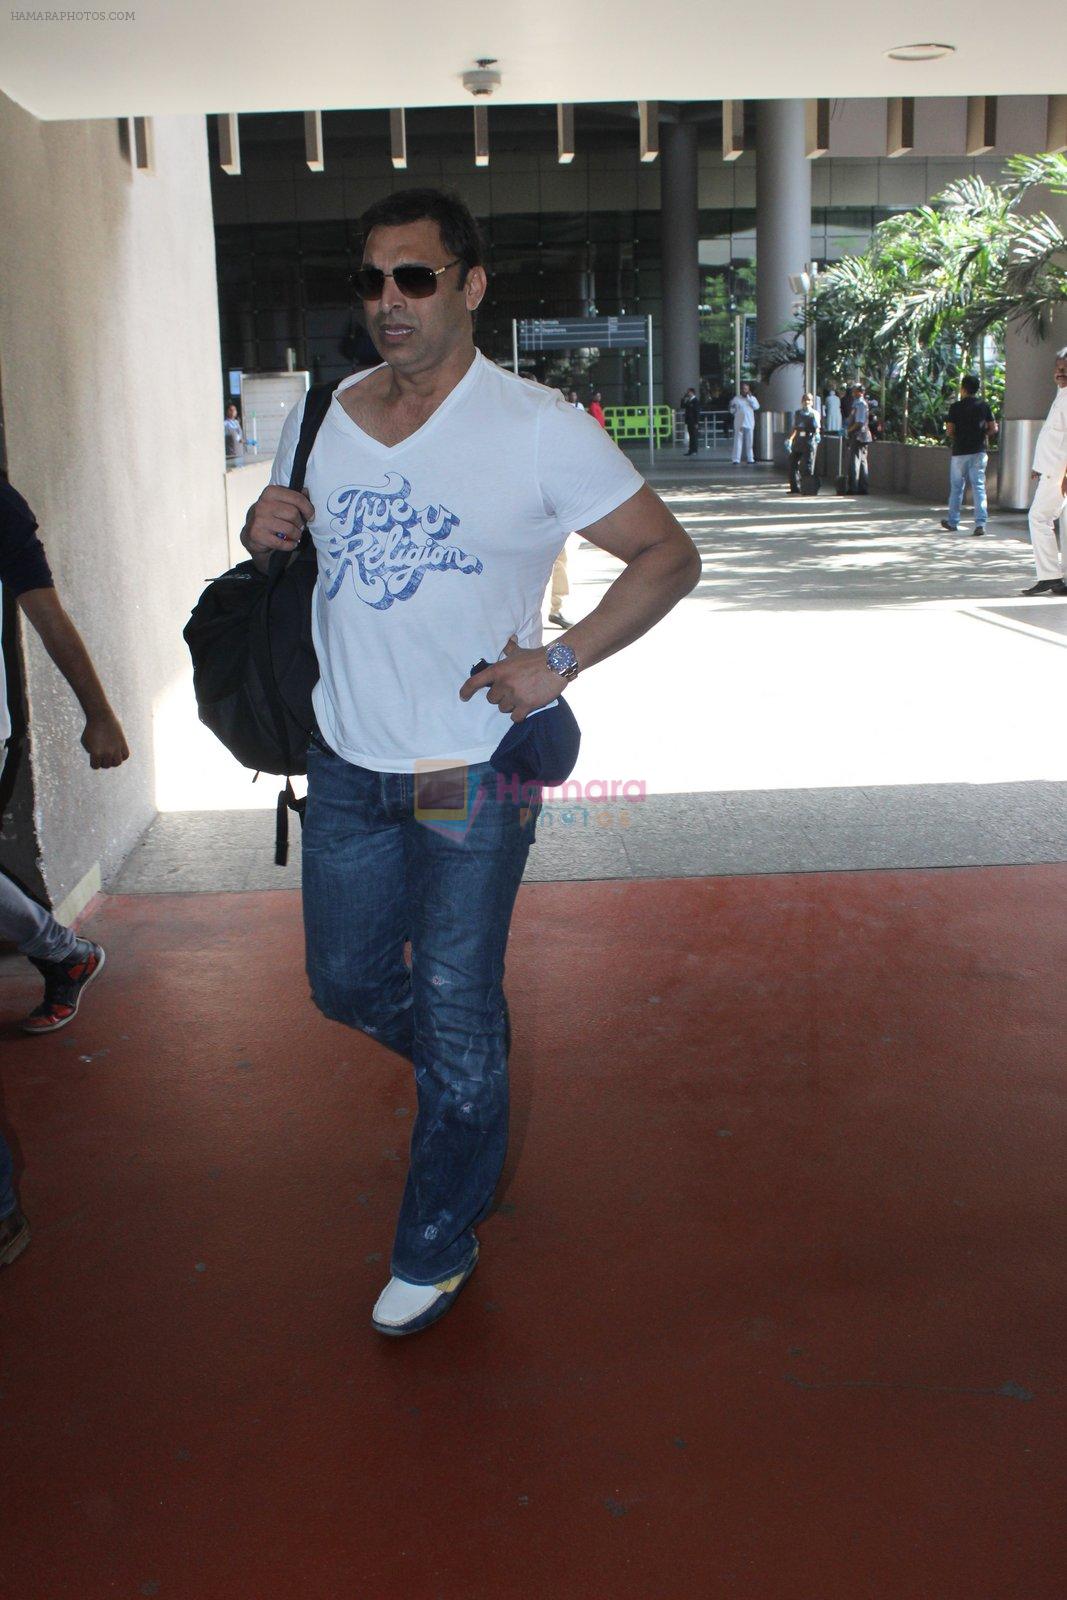 Shoaib Akhtar snapped at airport on 28th March 2016